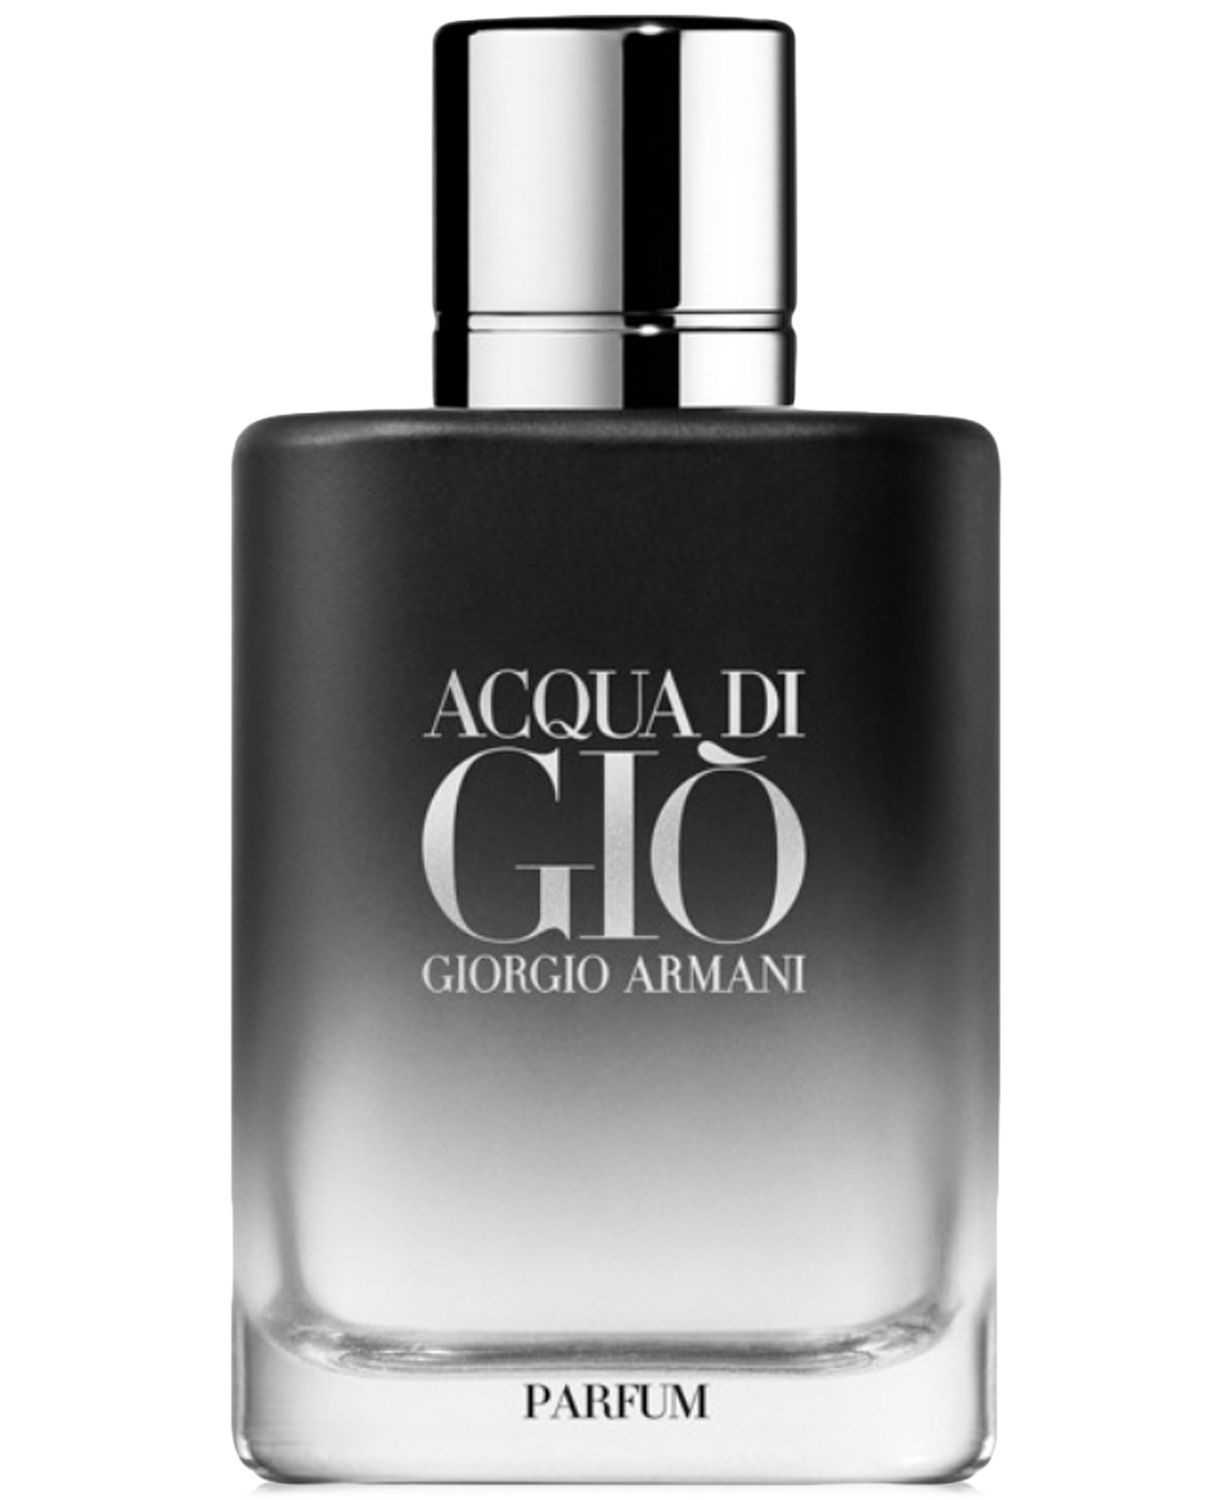 FREE deluxe mini with $150 purchase from the Armani Beauty Acqua Di Gio fragrance collection